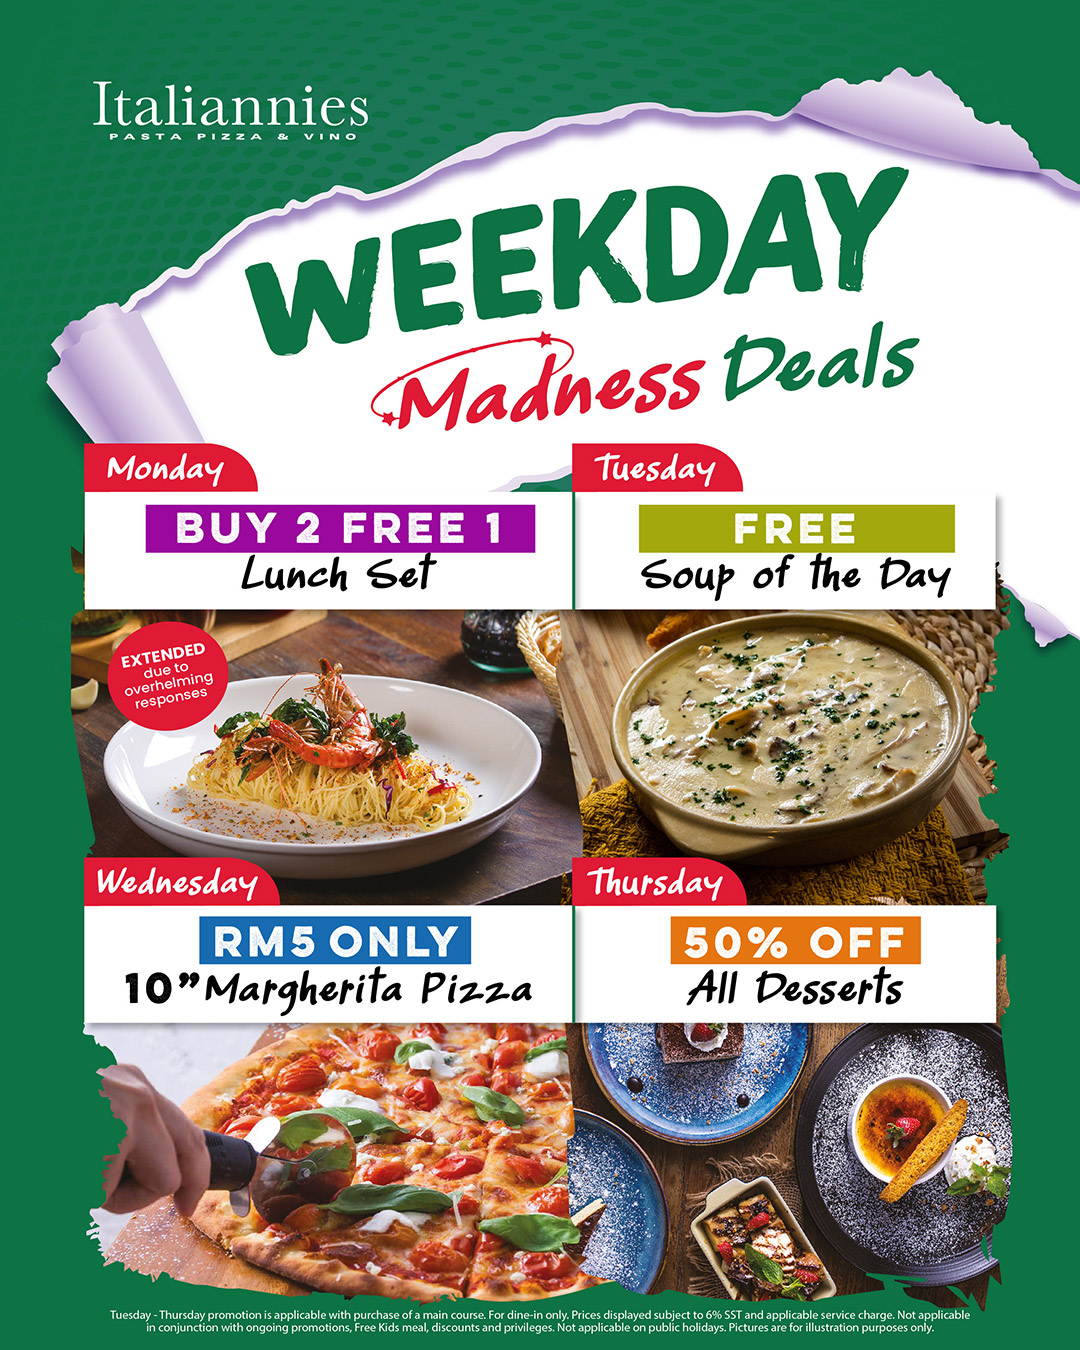 Weekday Madness Deals